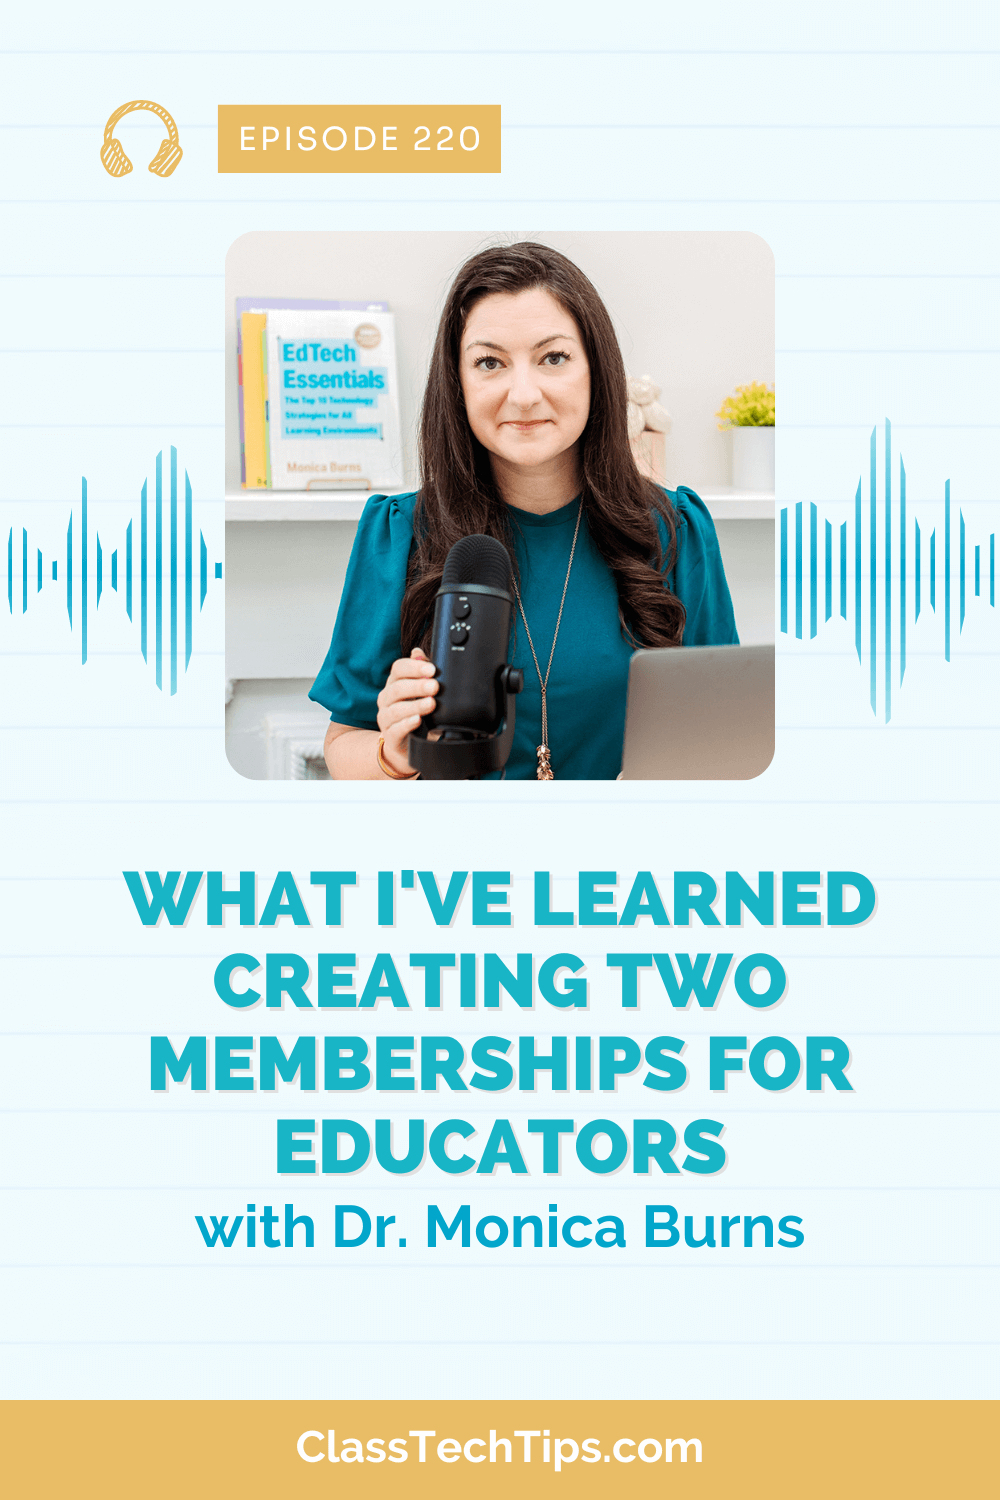 Podcast host at her desk with a computer and microphone, ready to share experiences and tips on running successful memberships for educators.